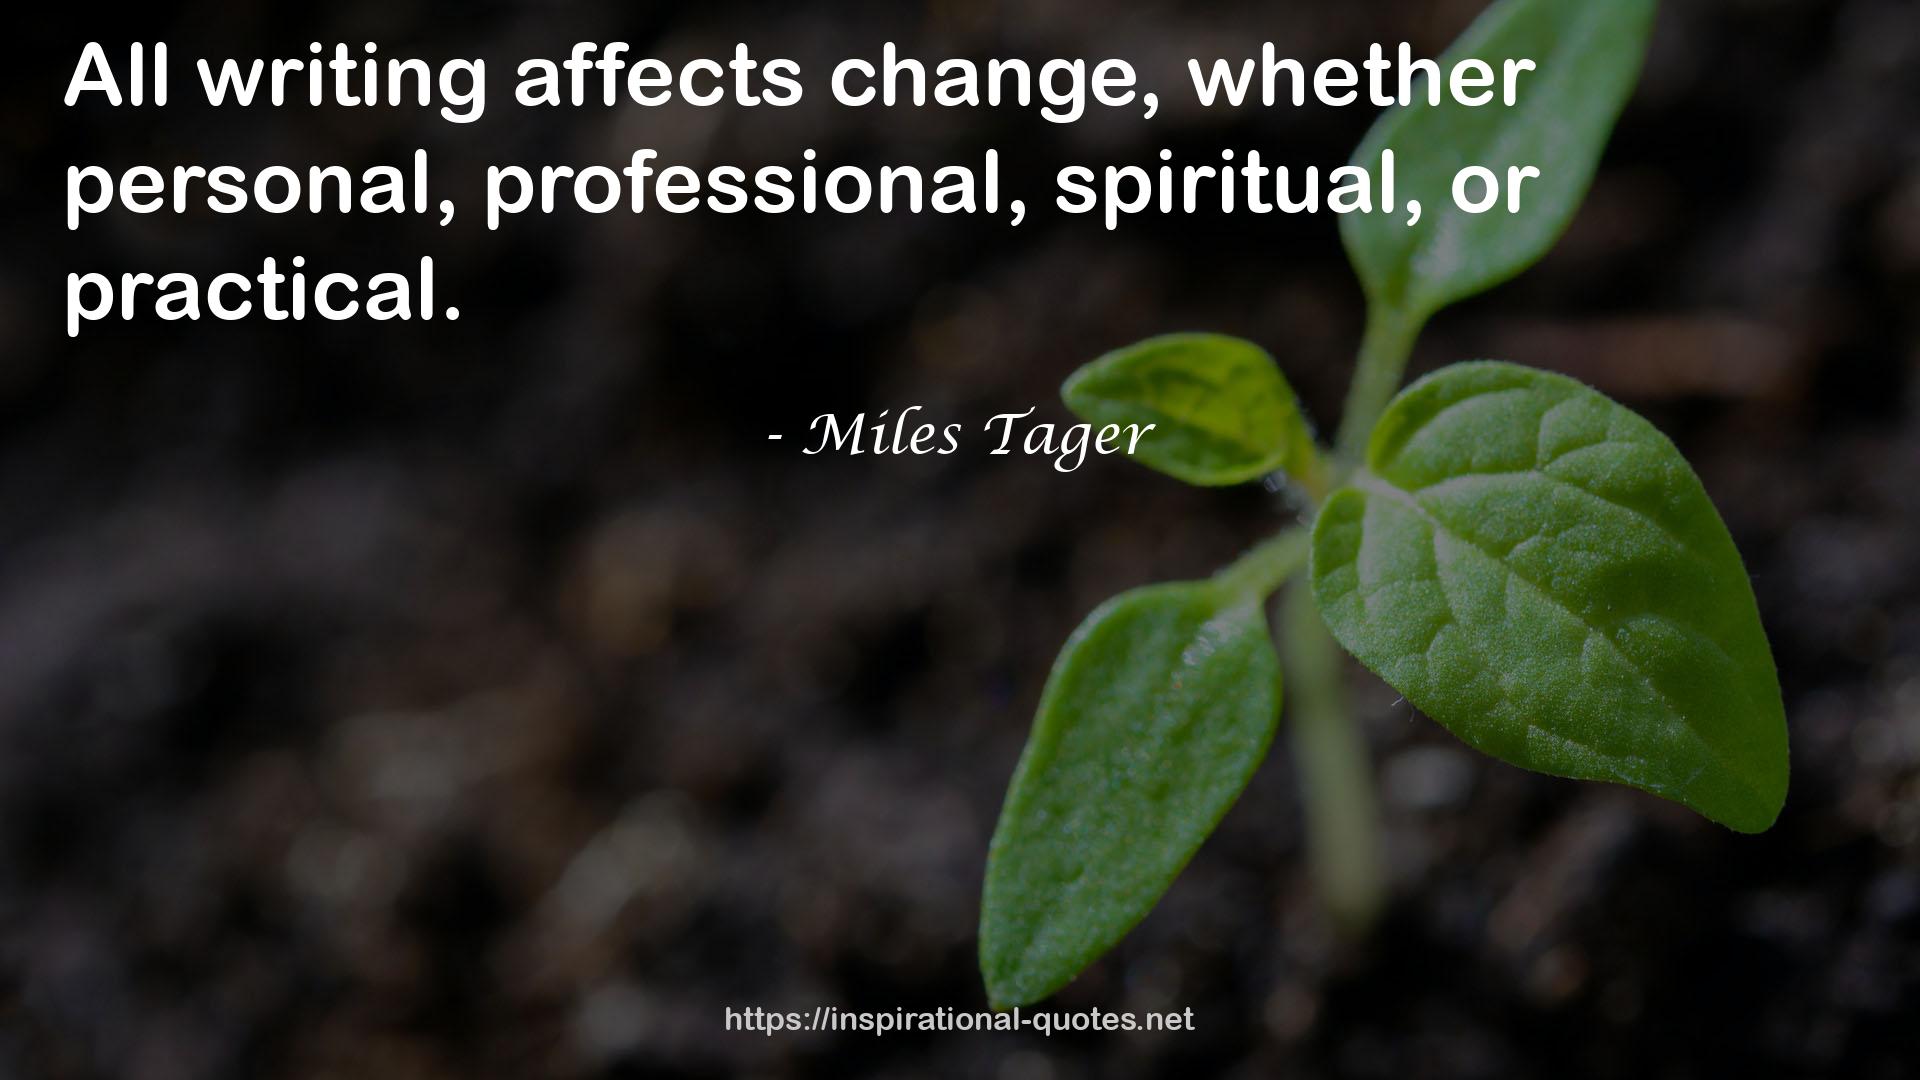 Miles Tager QUOTES